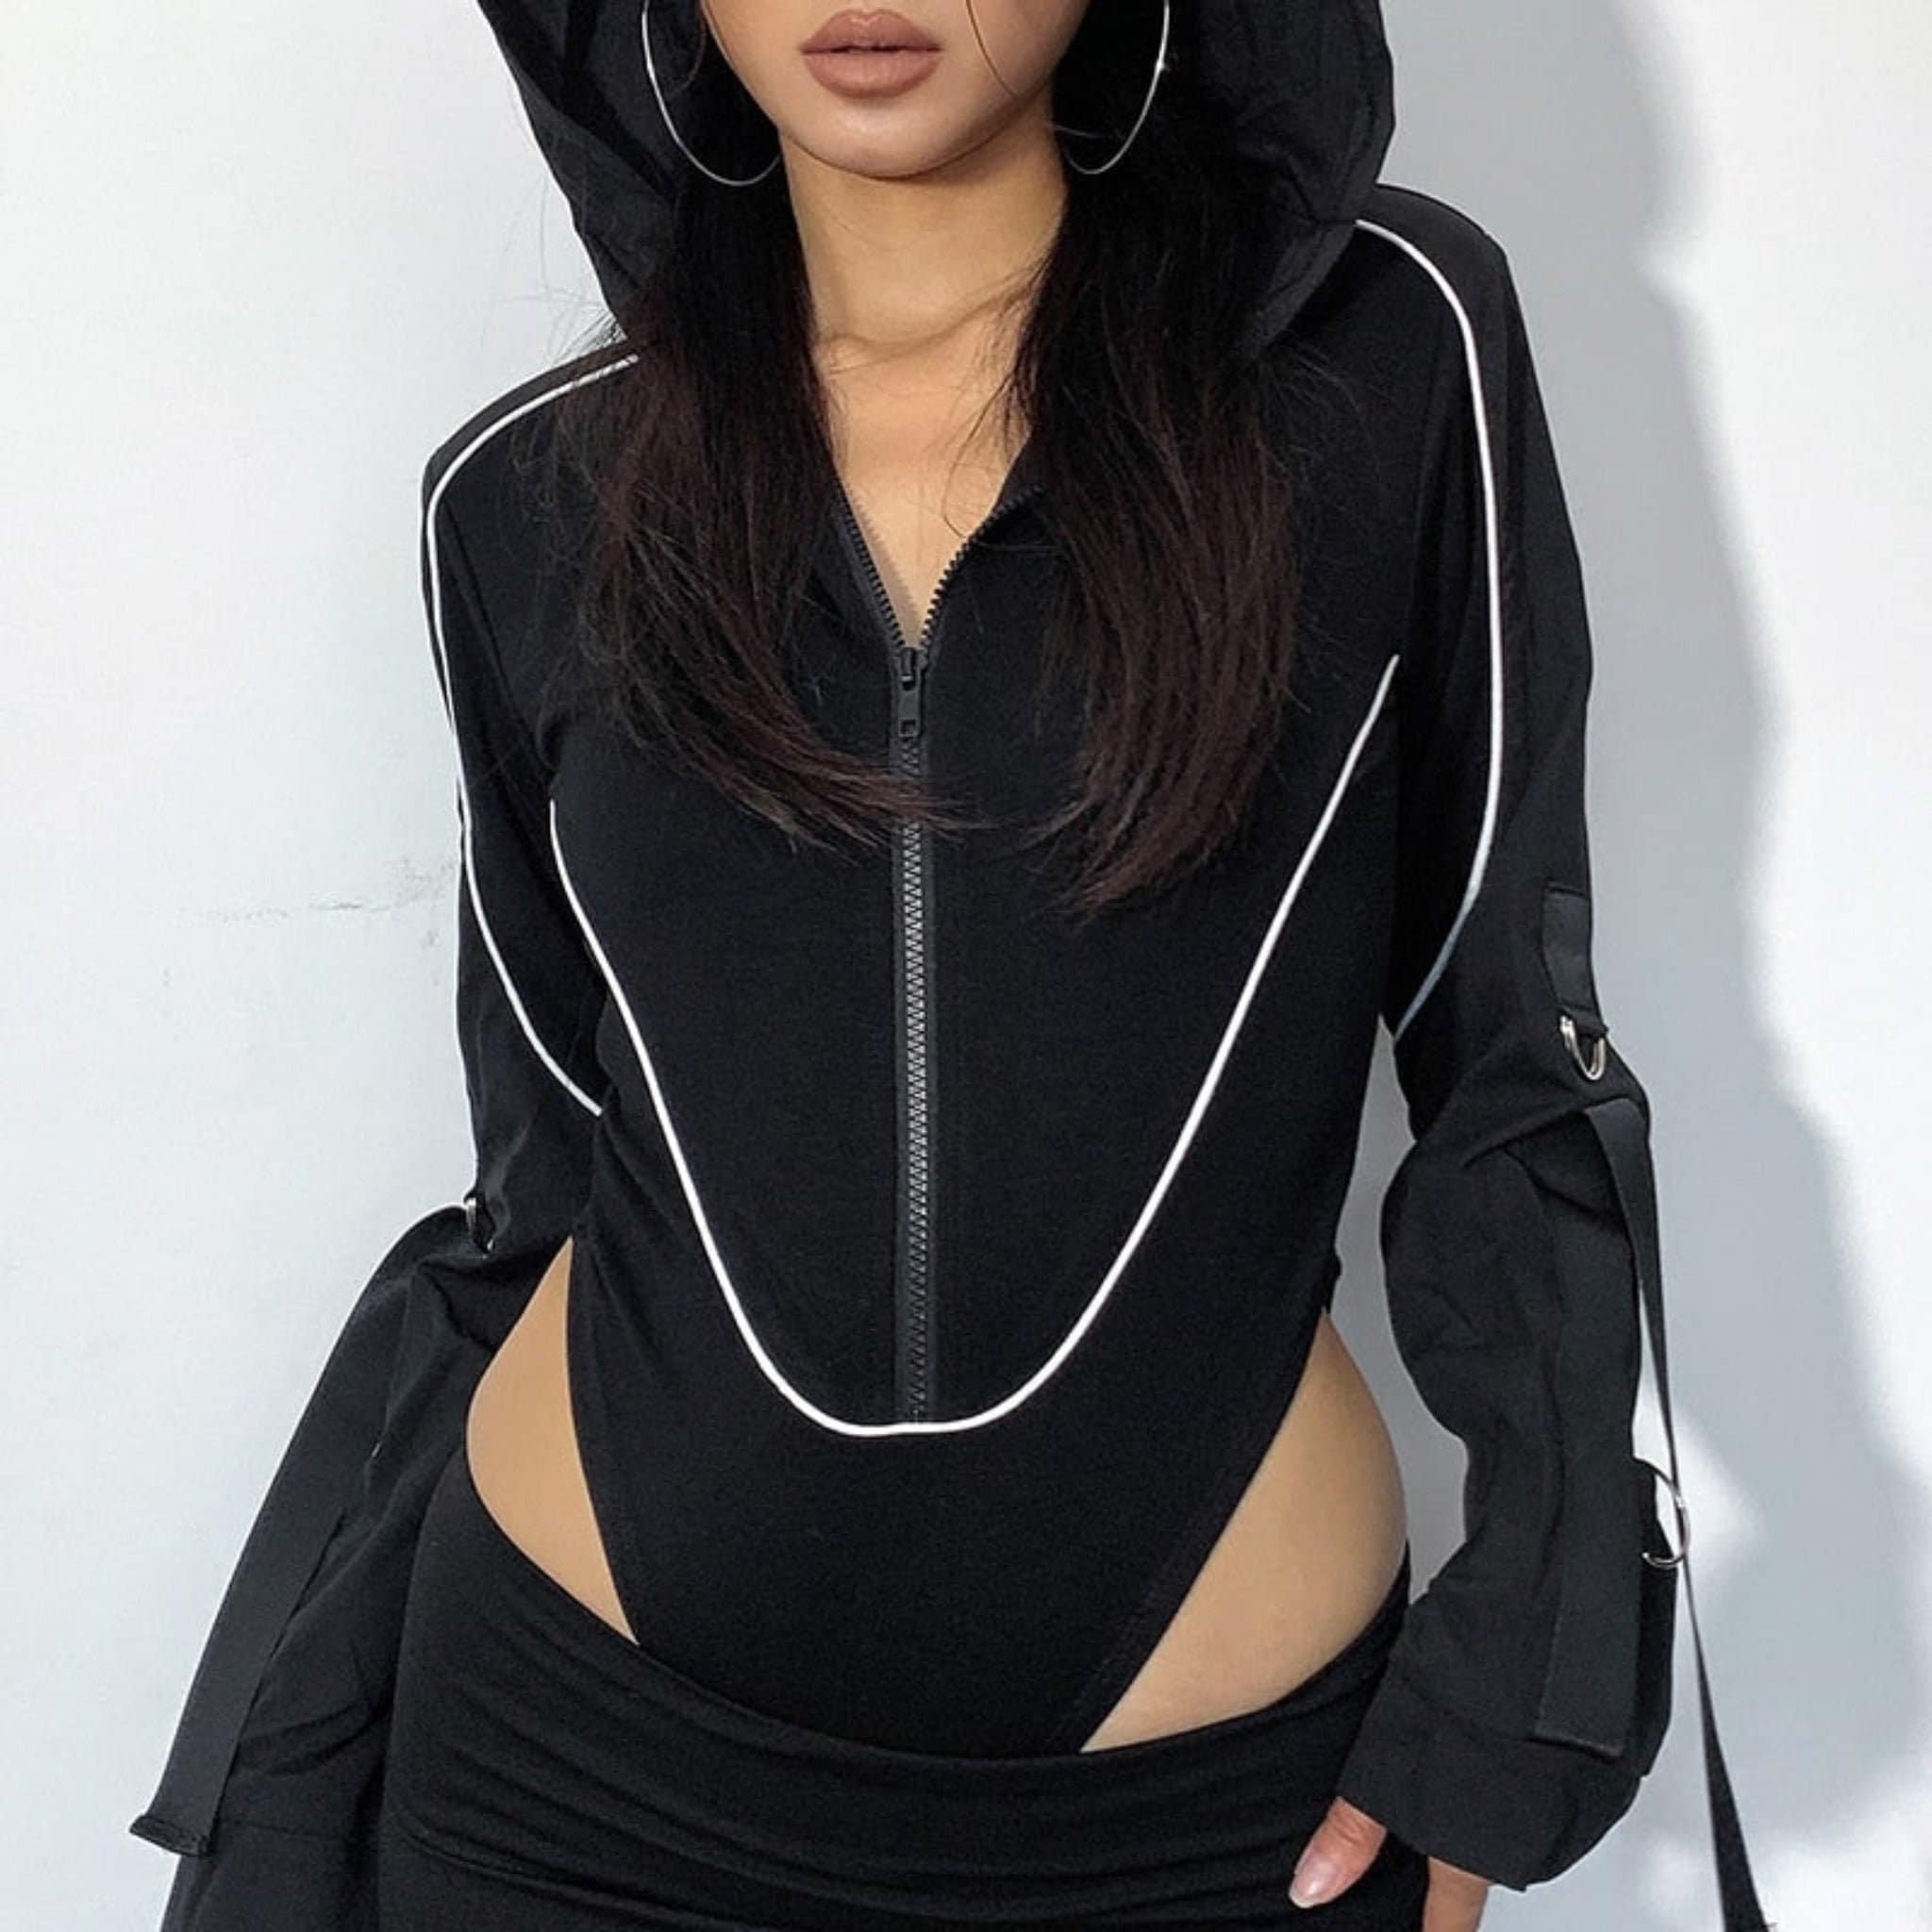 High Cut Zip Up Hooded Bodysuit With Long Sleeve In Black